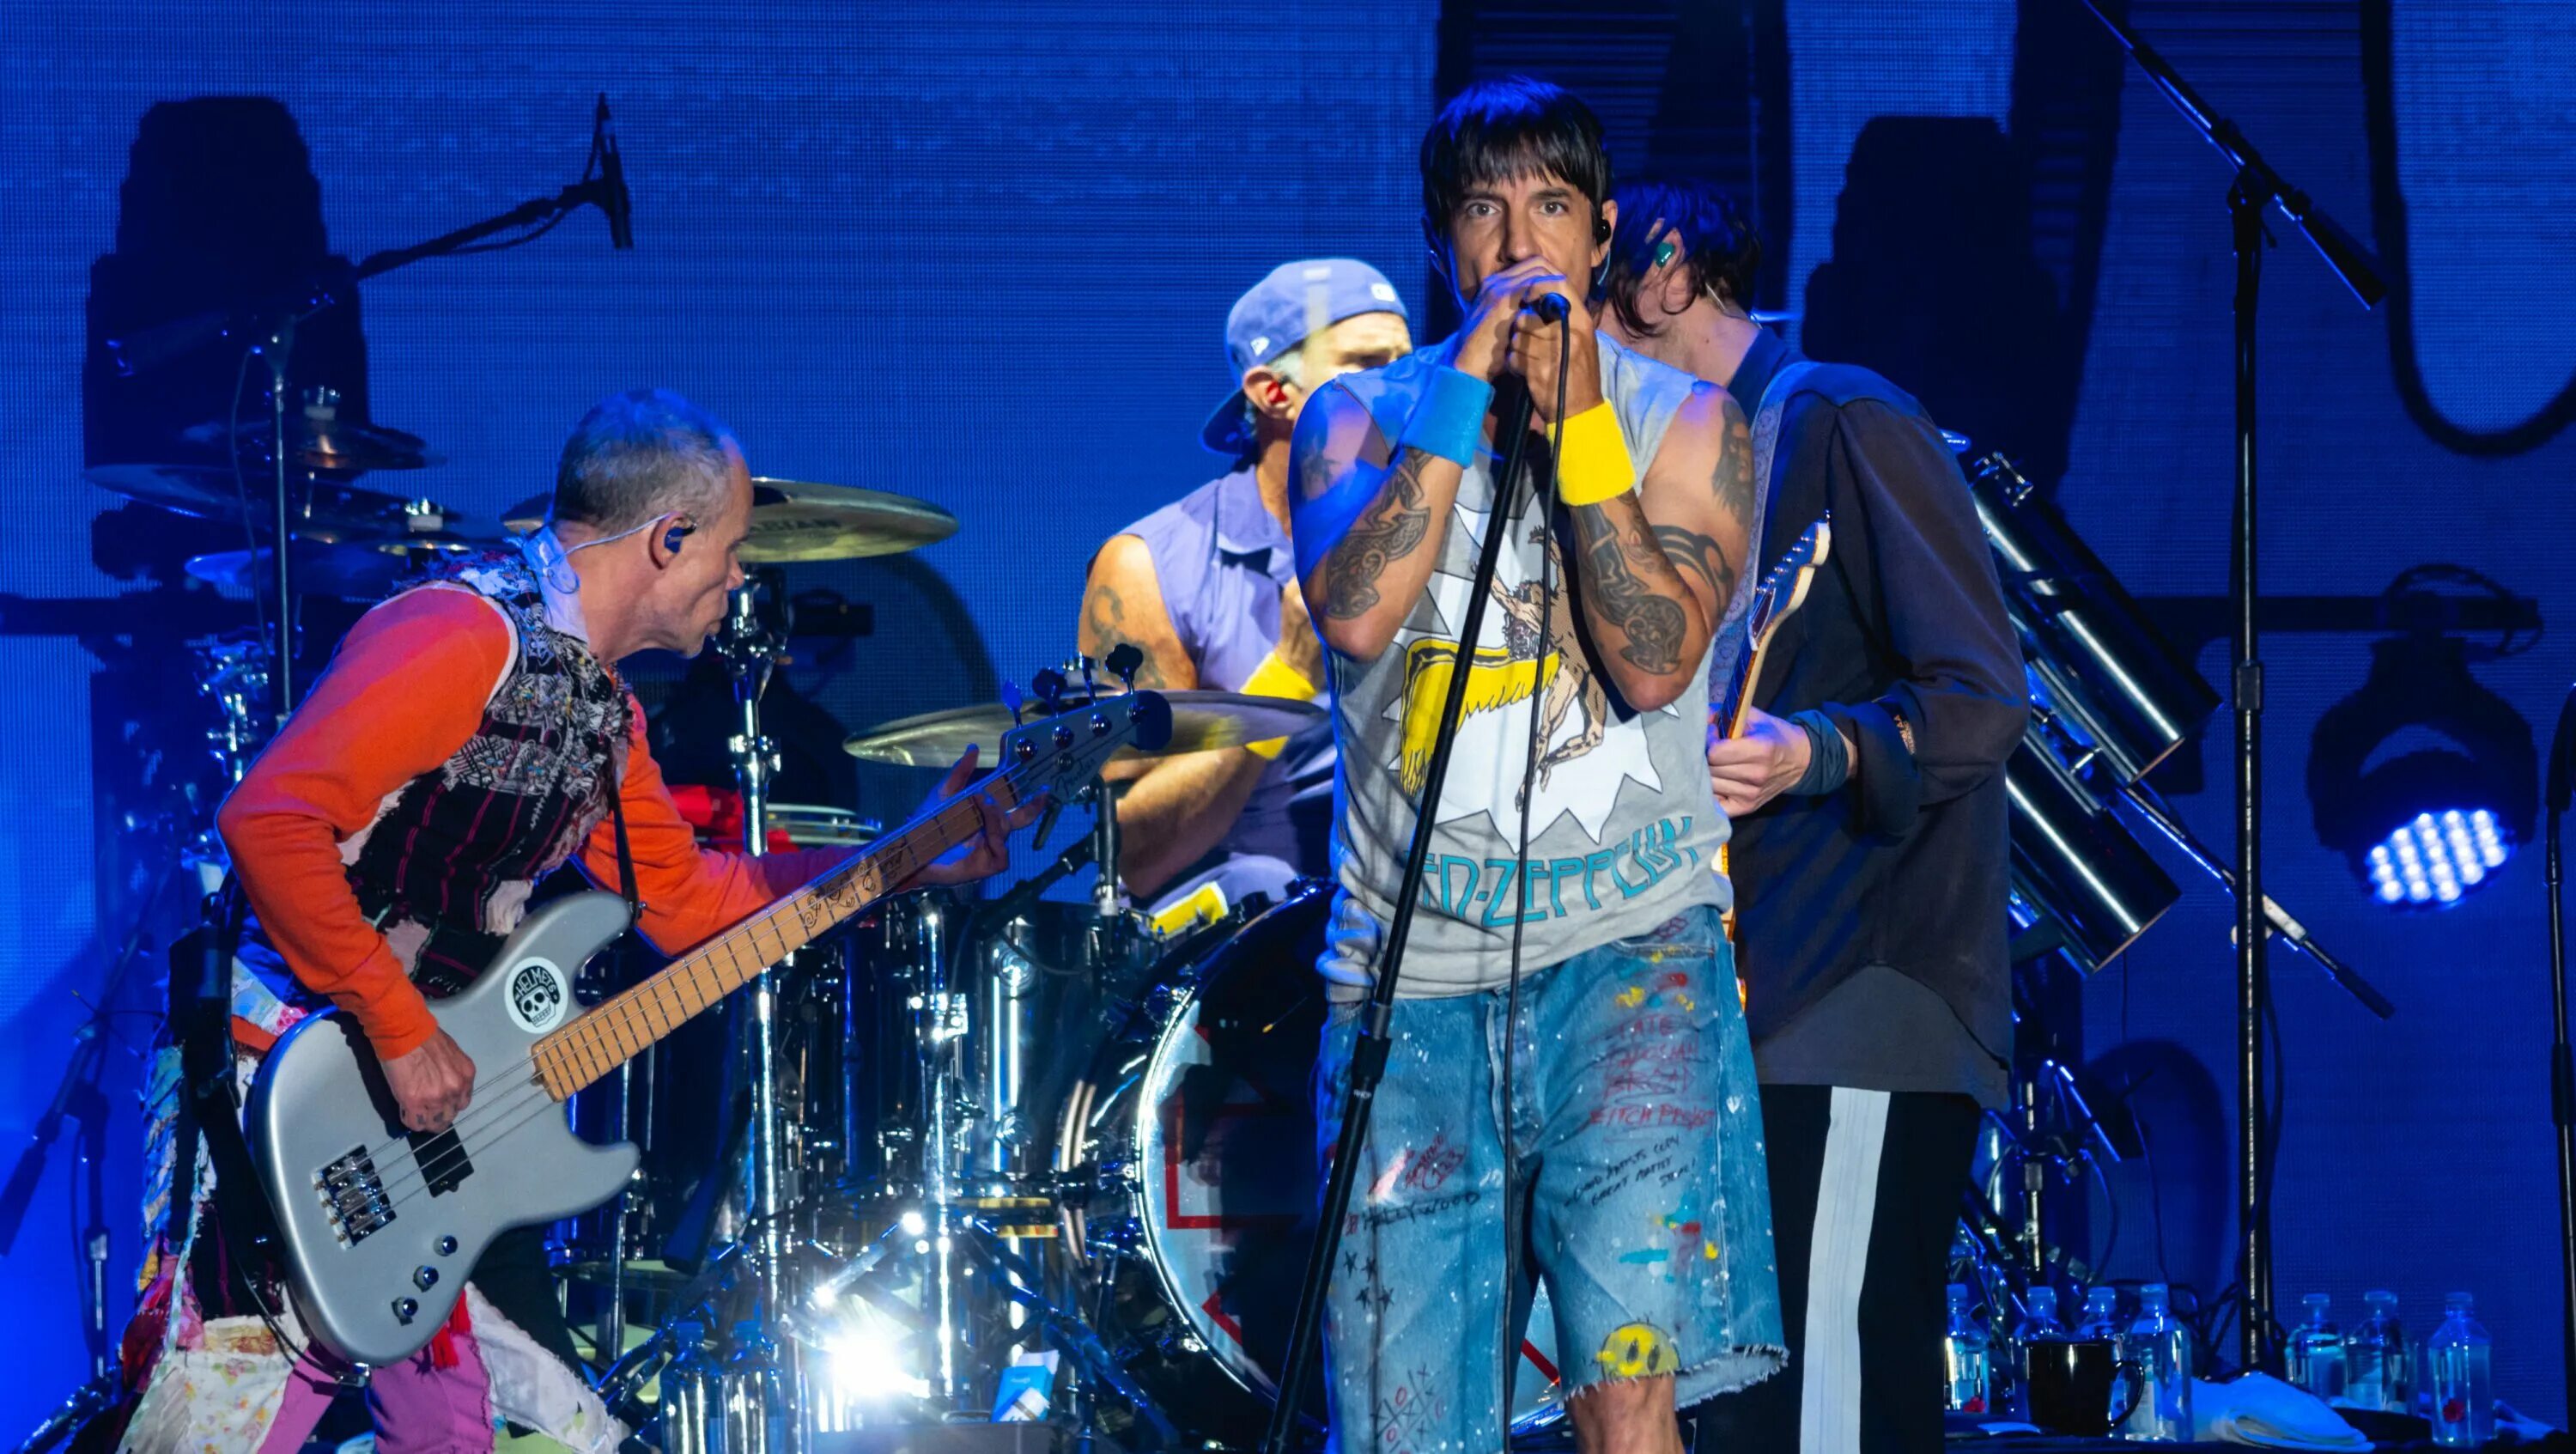 Red hot chili peppers love. RHCP 2022. RHCP 2022 album. RHCP 2008. Red hot Chili Peppers 2022.